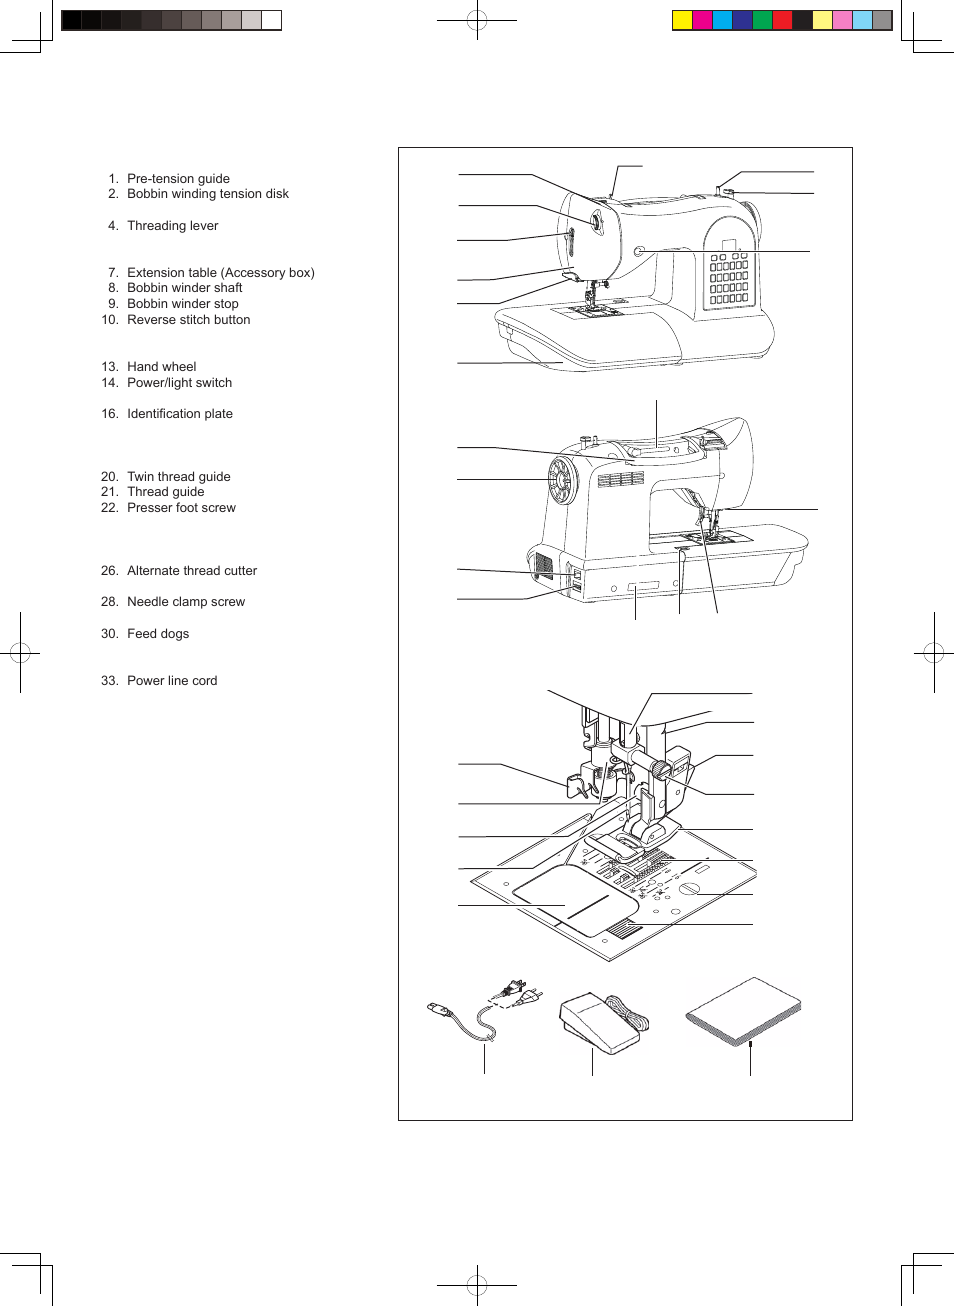 Knowing your sewing machine | SINGER 8768 HERITAGE User Manual | Page 8 / 60